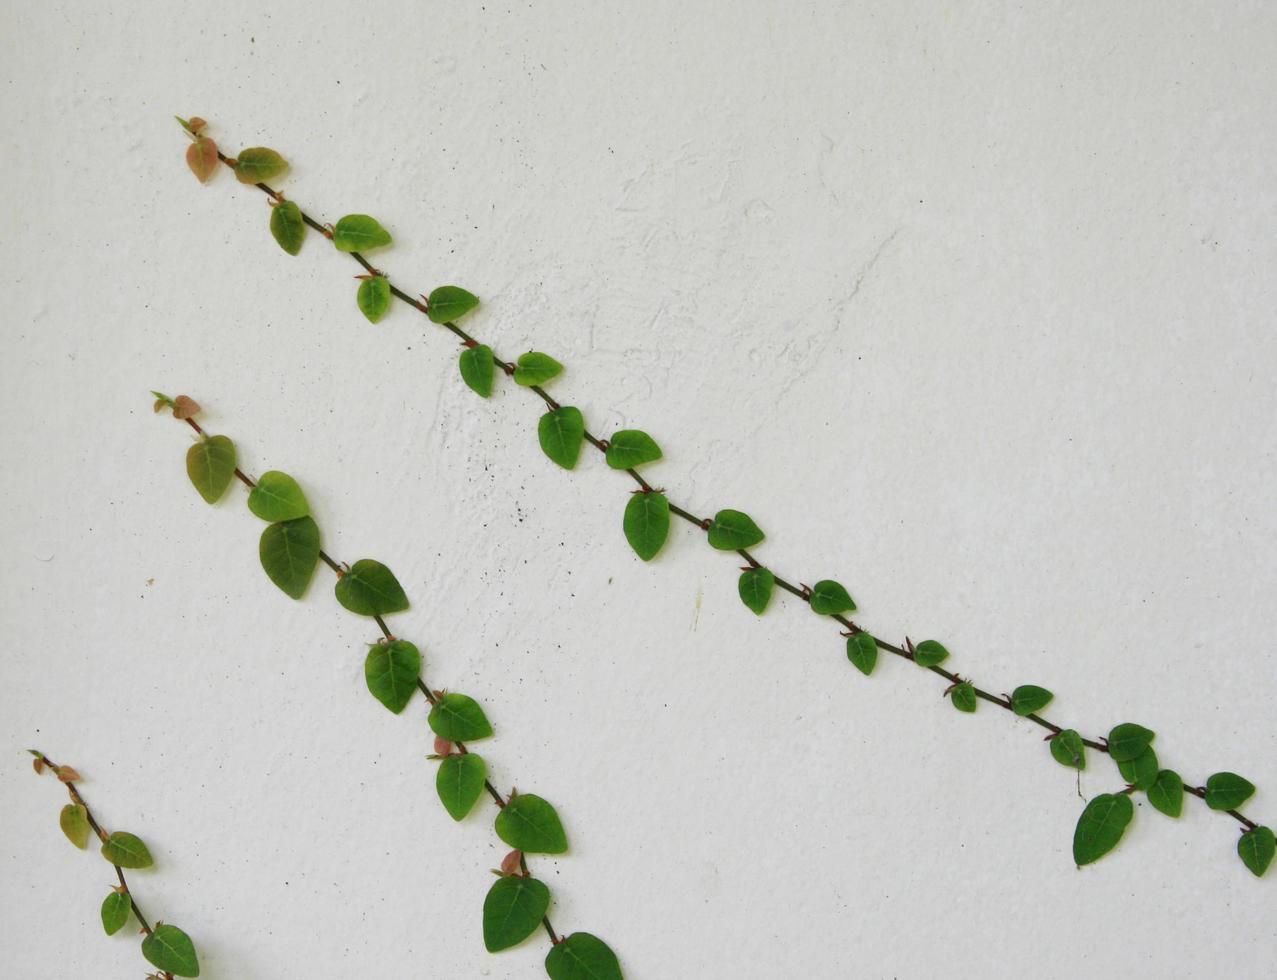 The Green Creeper Plant on wall photo